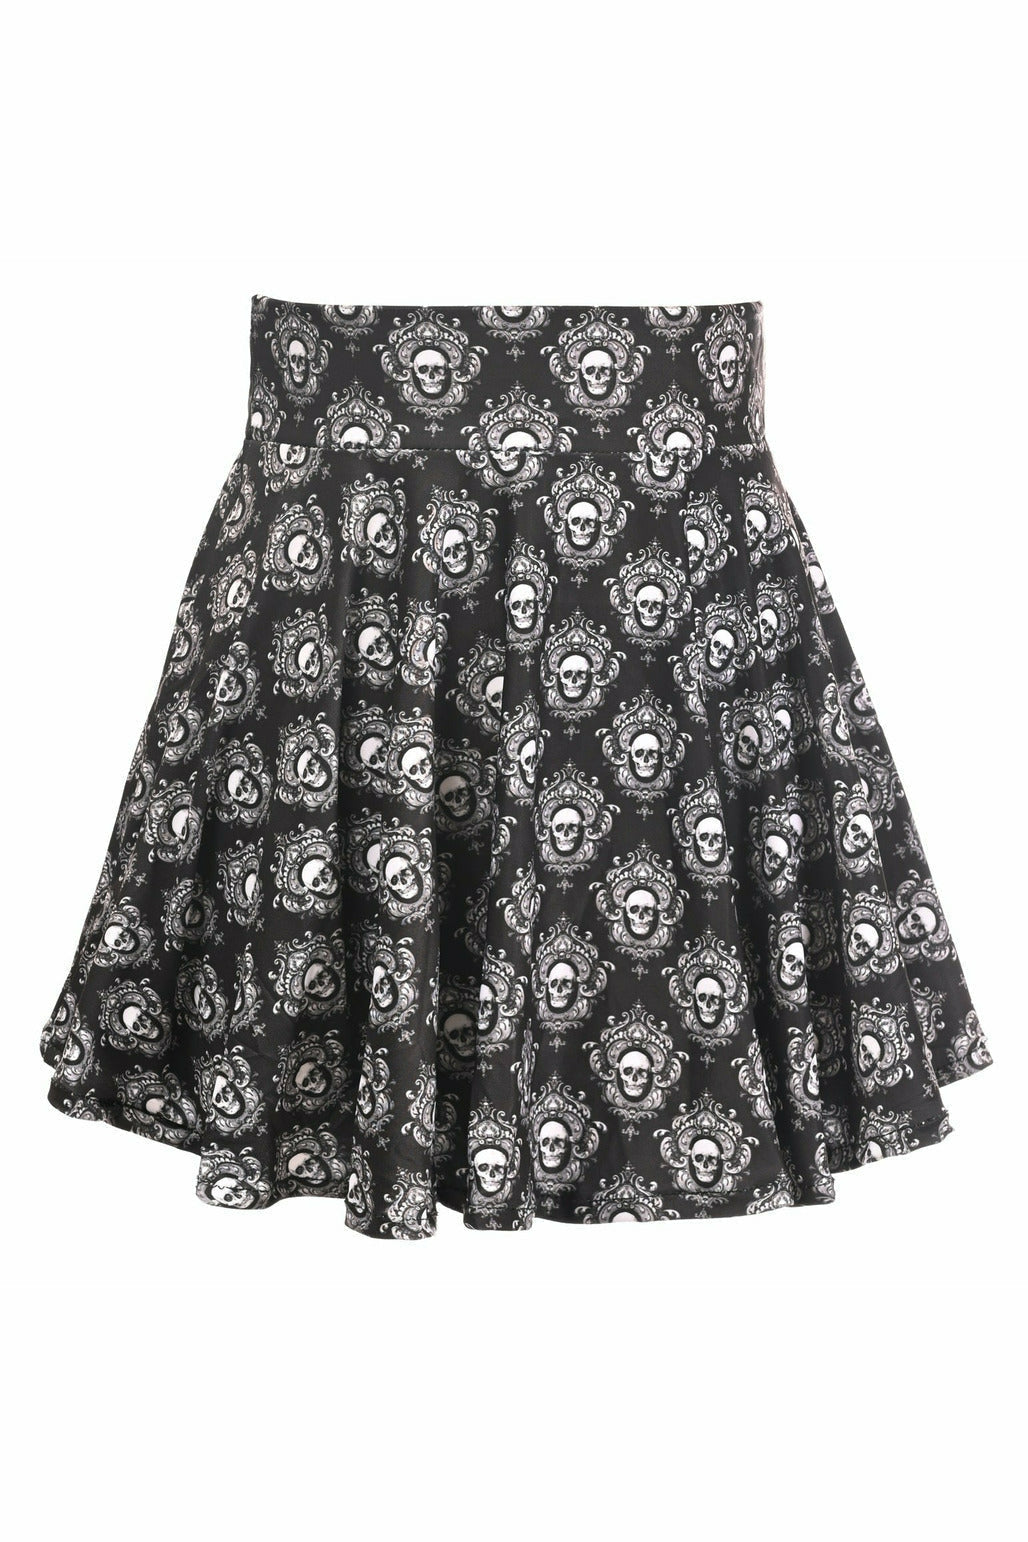 Gothic Skull Print Stretch Lycra Skirt in 3 Color Choices in Size XS, S, M, L, XL, 2X, 3X, 4X, 5X, 6X